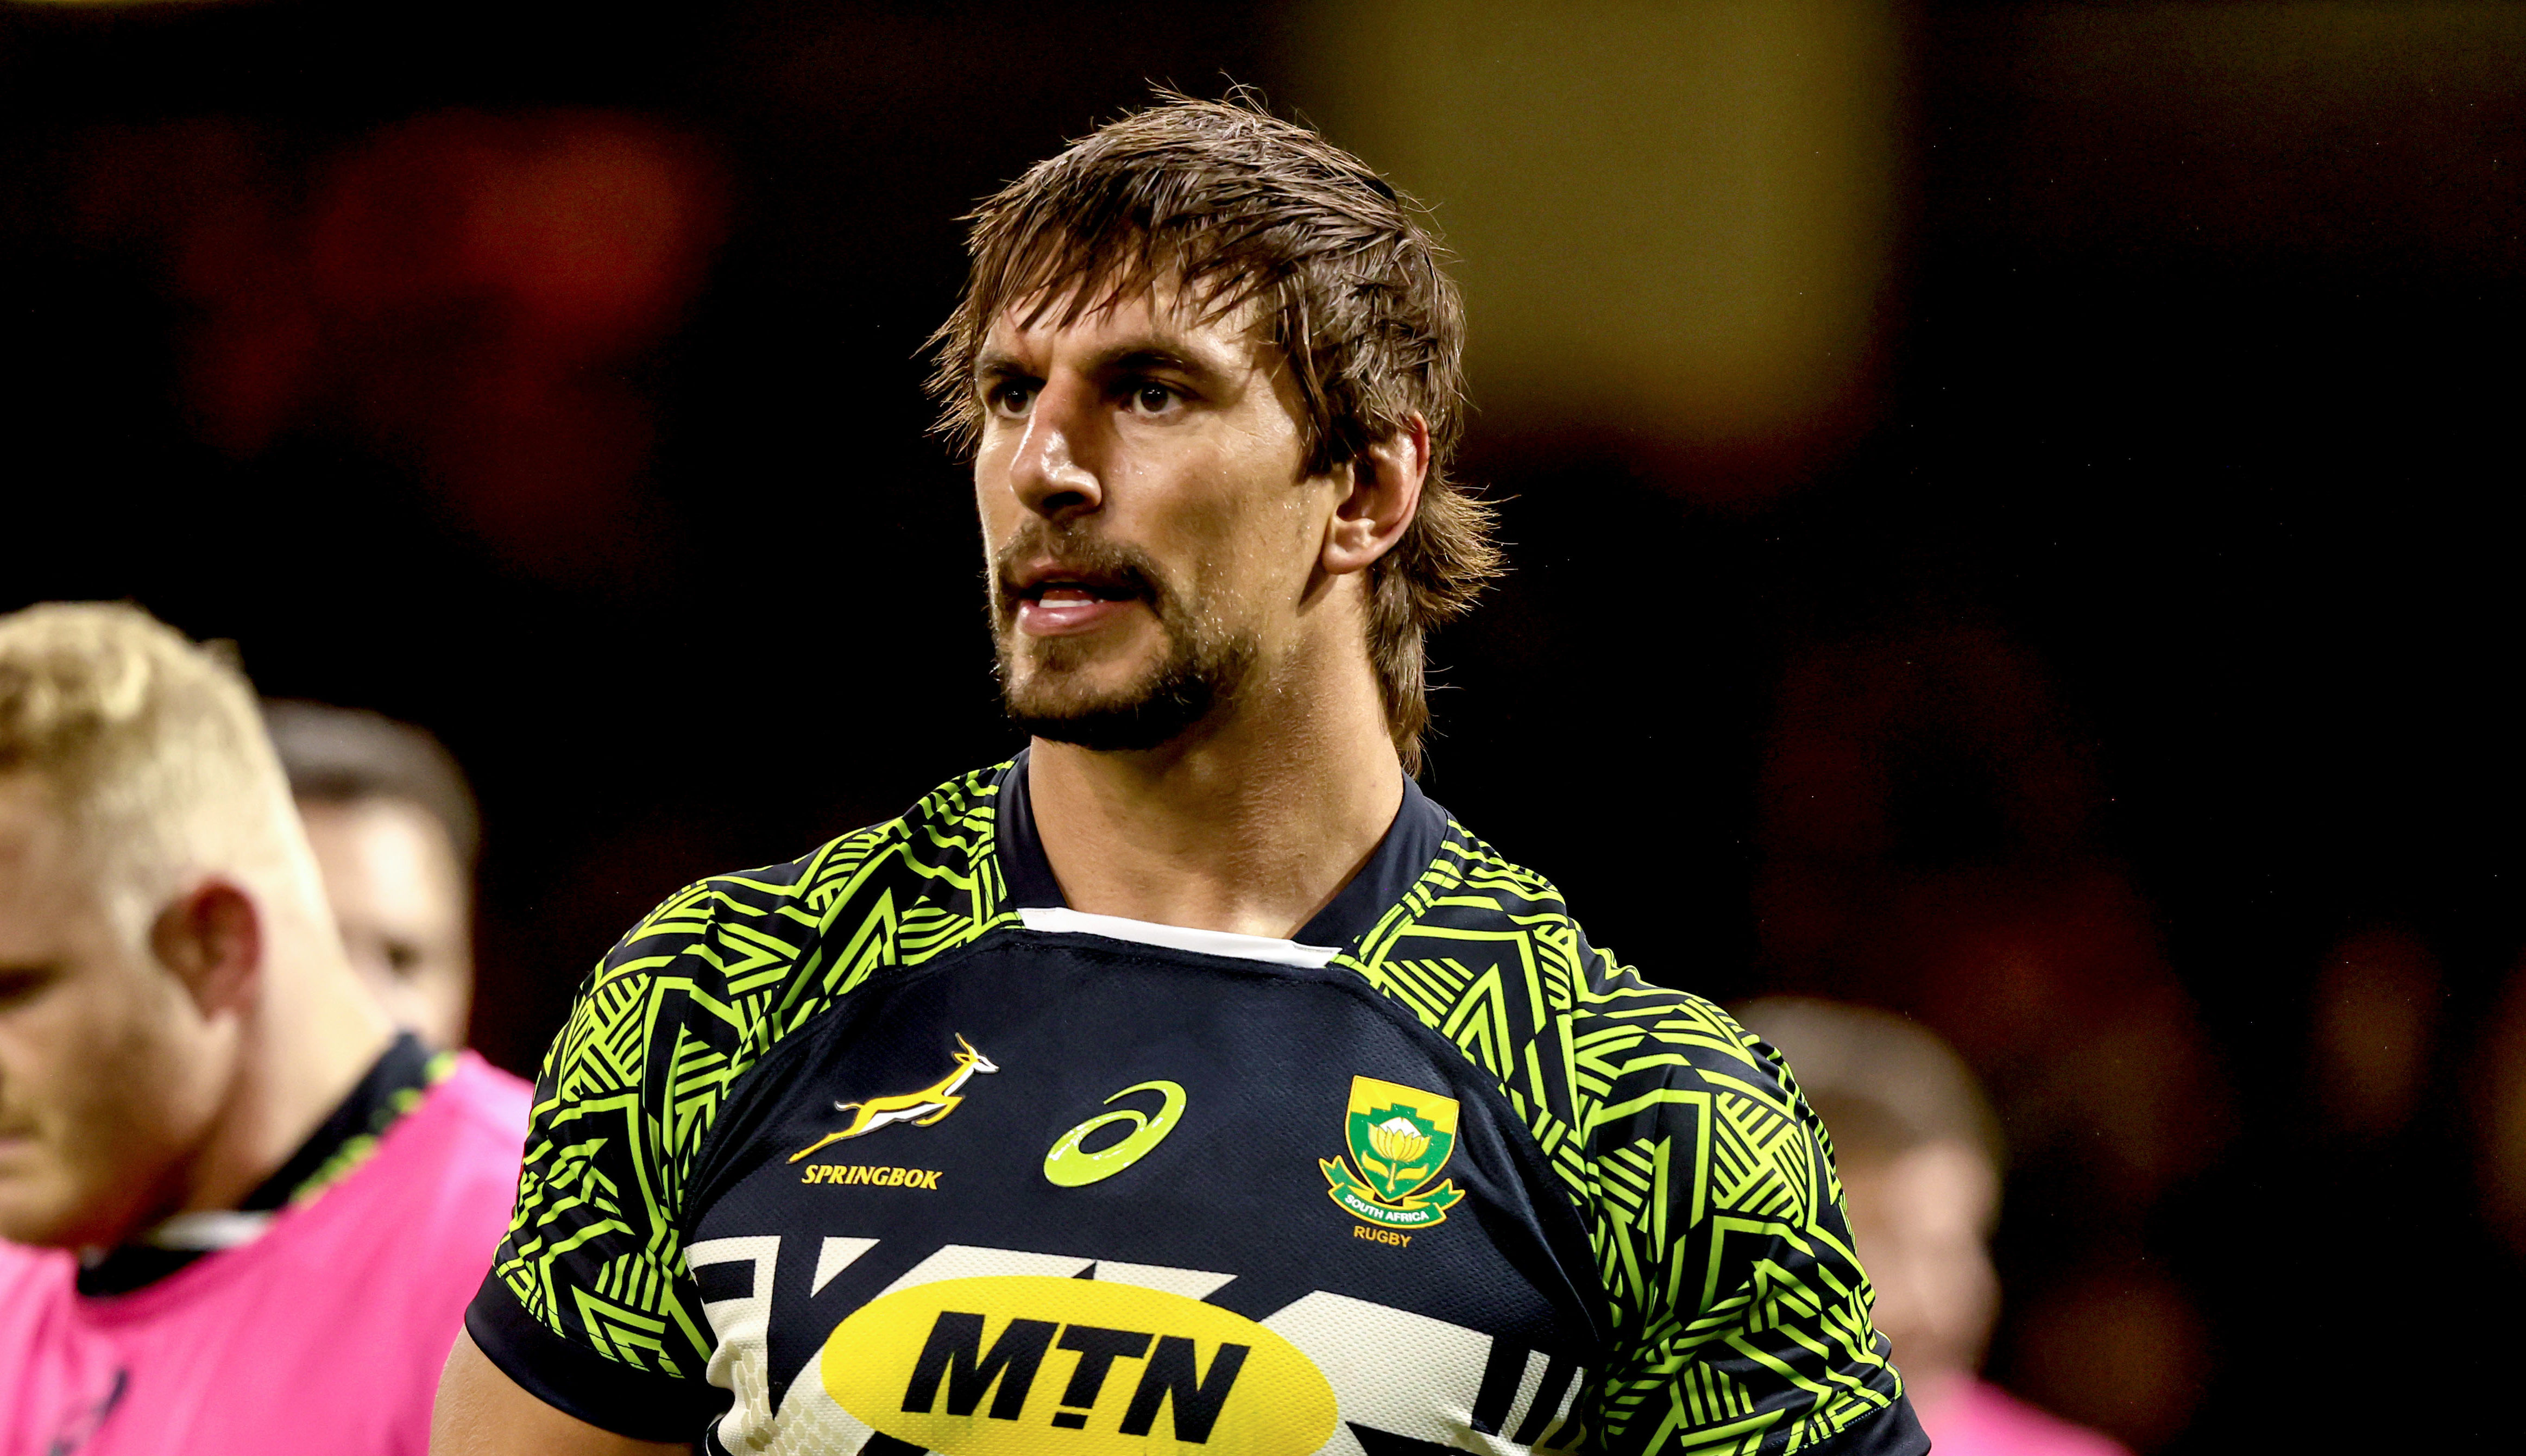 Mandatory Credit: Photo by Morgan Treacy/INPHO/Shutterstock/BackpagePix (12591822n) Wales vs South Africa. South Africa's Eben Etzebeth during the warm-up Autumn Nations Series, Principality Stadium, Cardiff, Wales - 06 Nov 2021